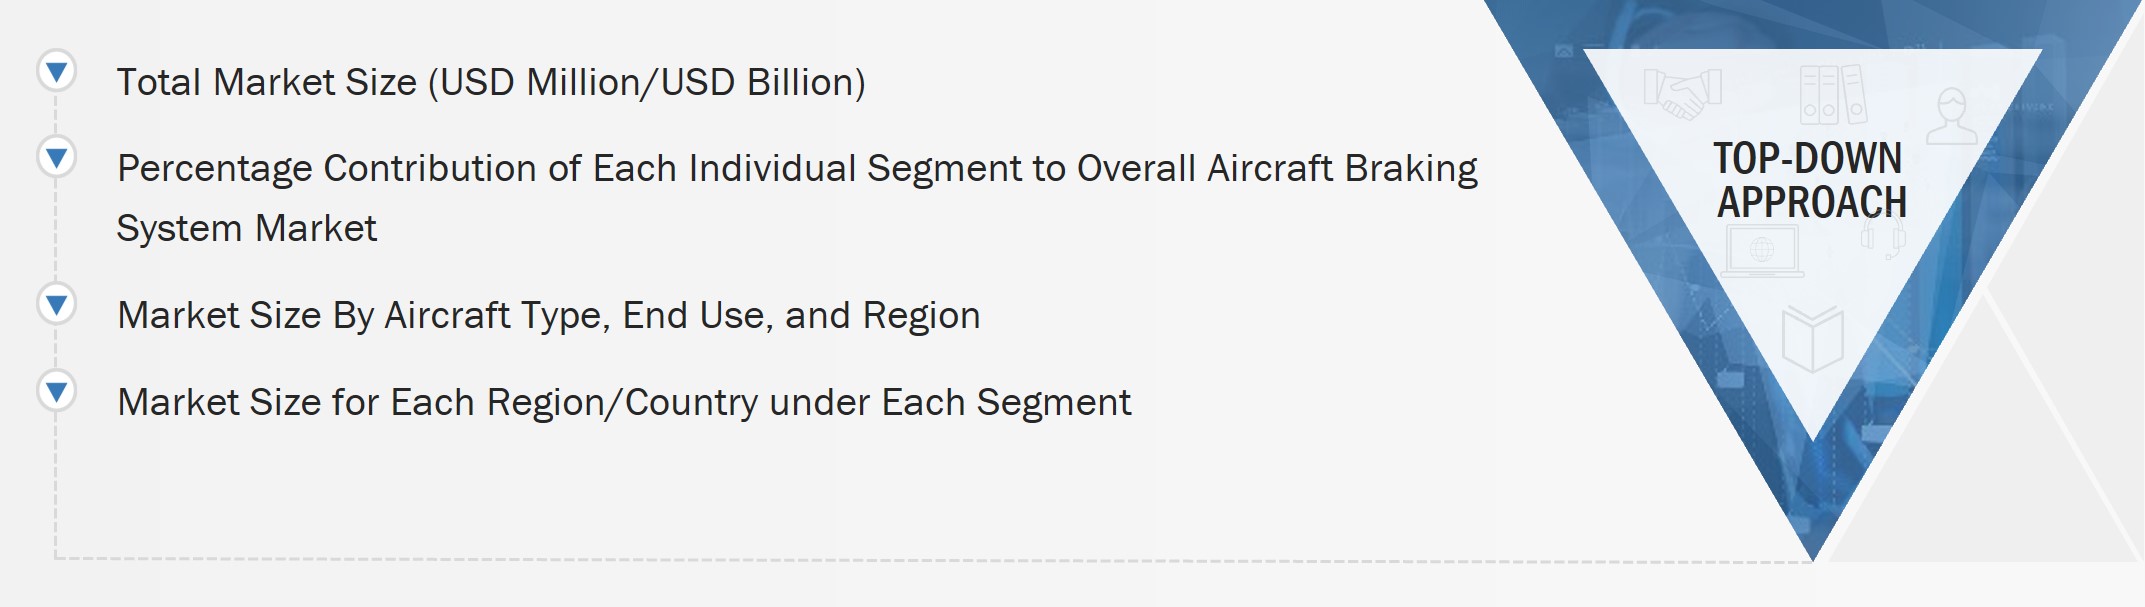 Aircraft Braking System Market Size, and Top-Down Approach 